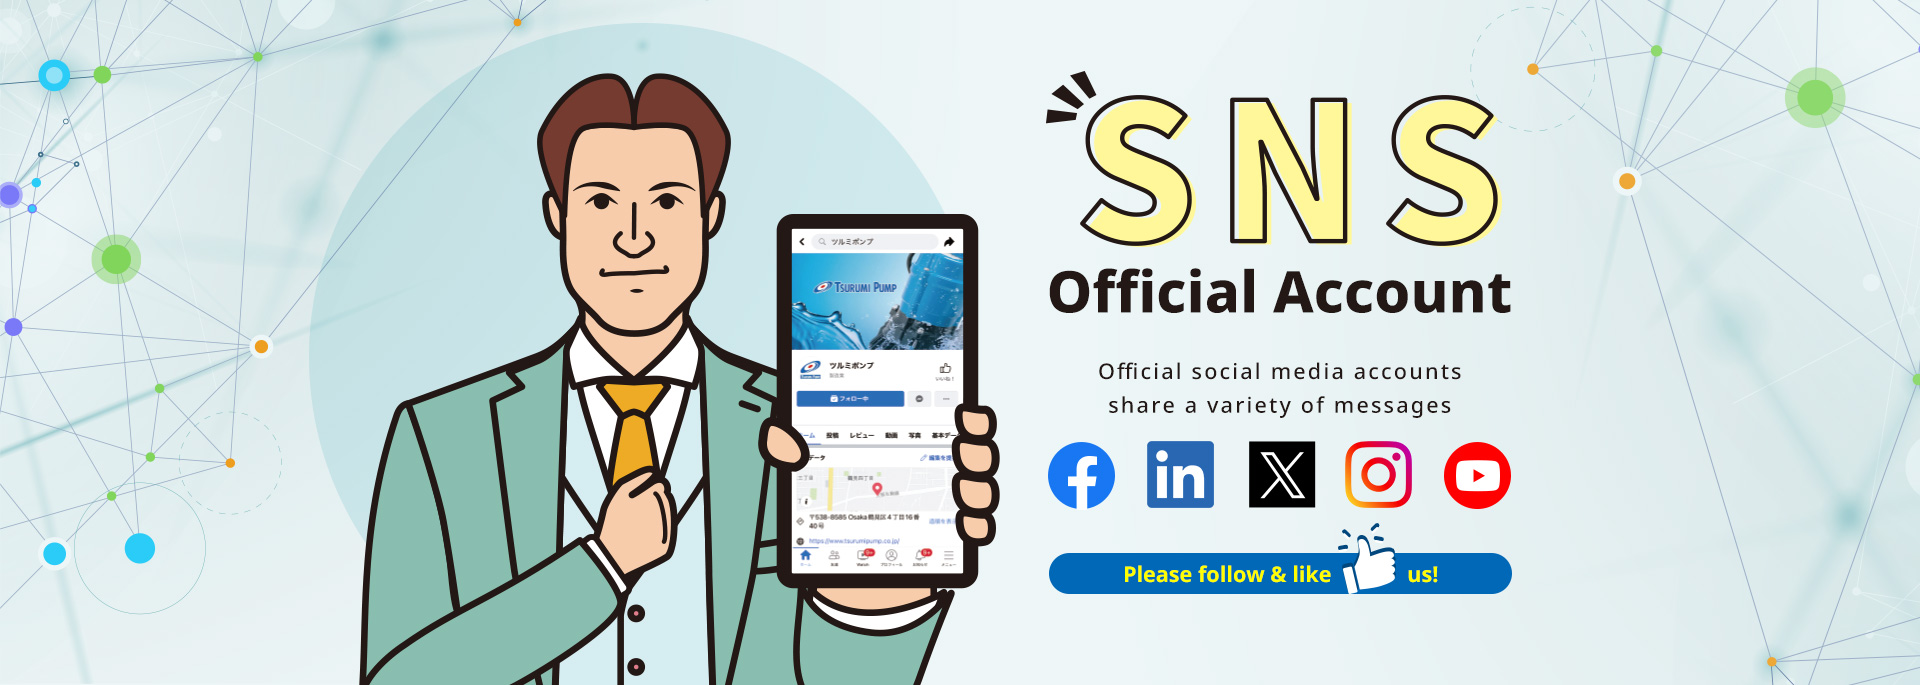 SNS Official Account